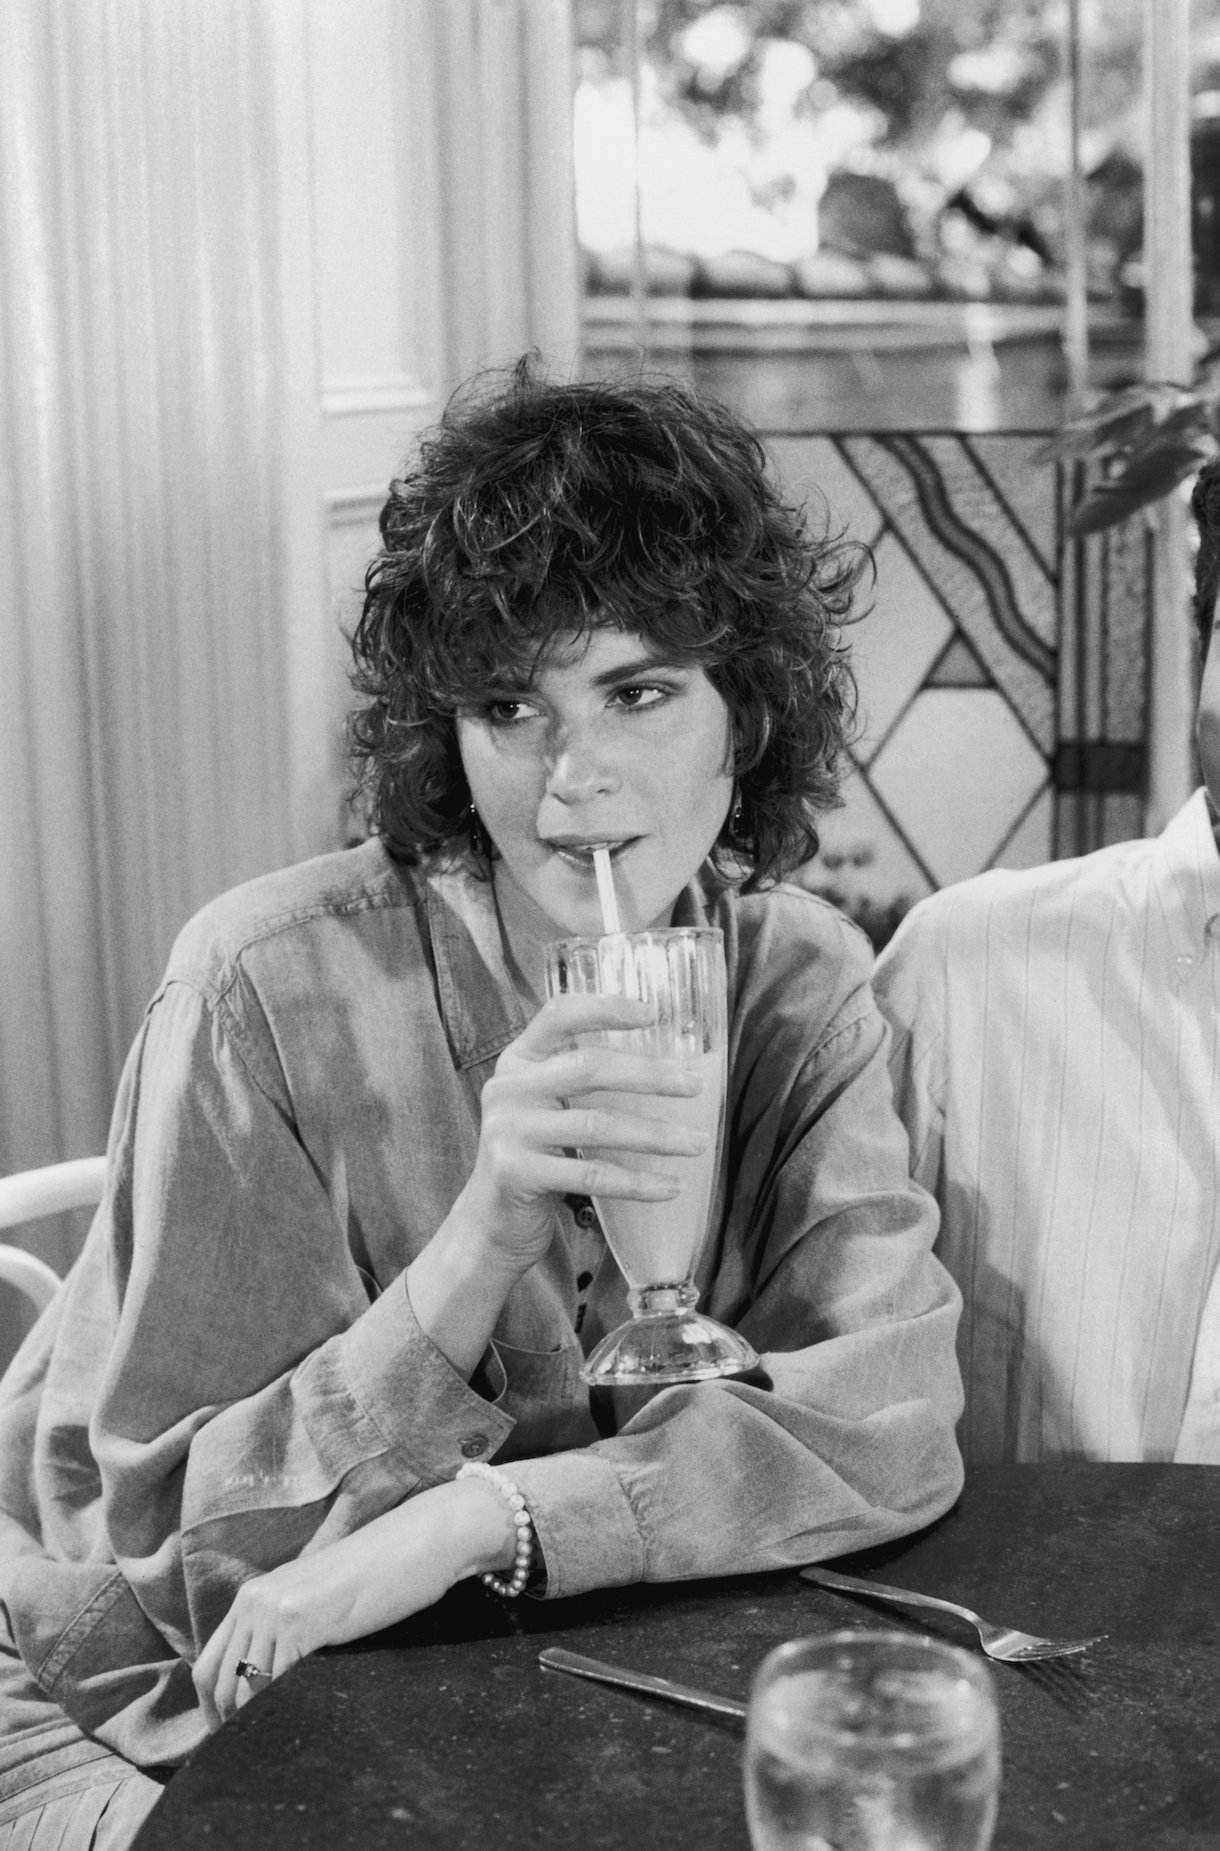 circa 1987:  American actor Ally Sheedy sips a large glass of orange juice at Serendipity restaurant in New York City